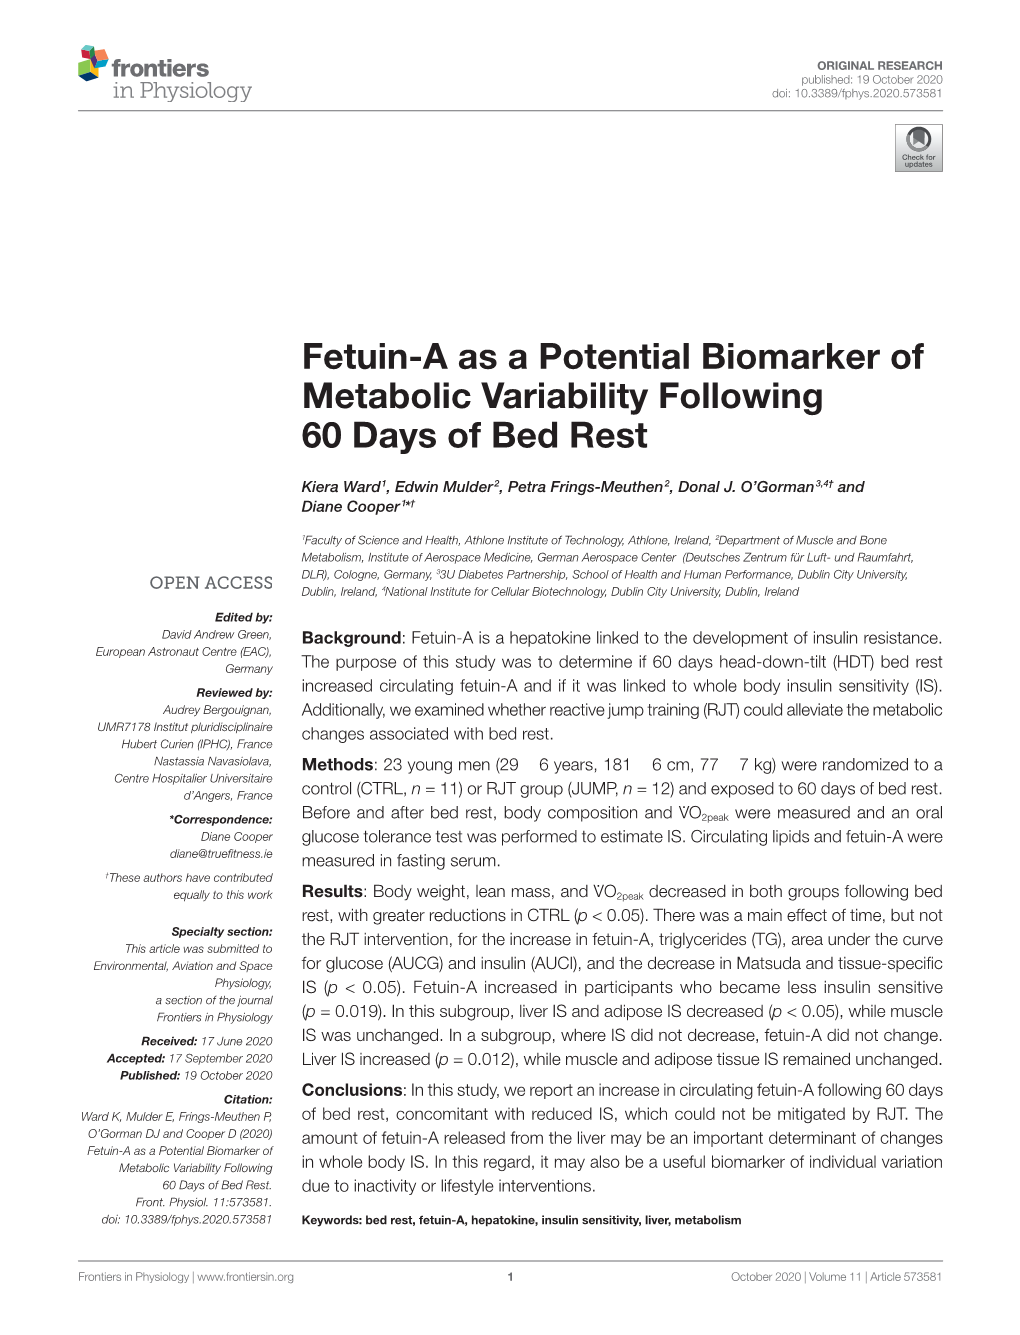 Fetuin-A As a Potential Biomarker of Metabolic Variability Following 60 Days of Bed Rest